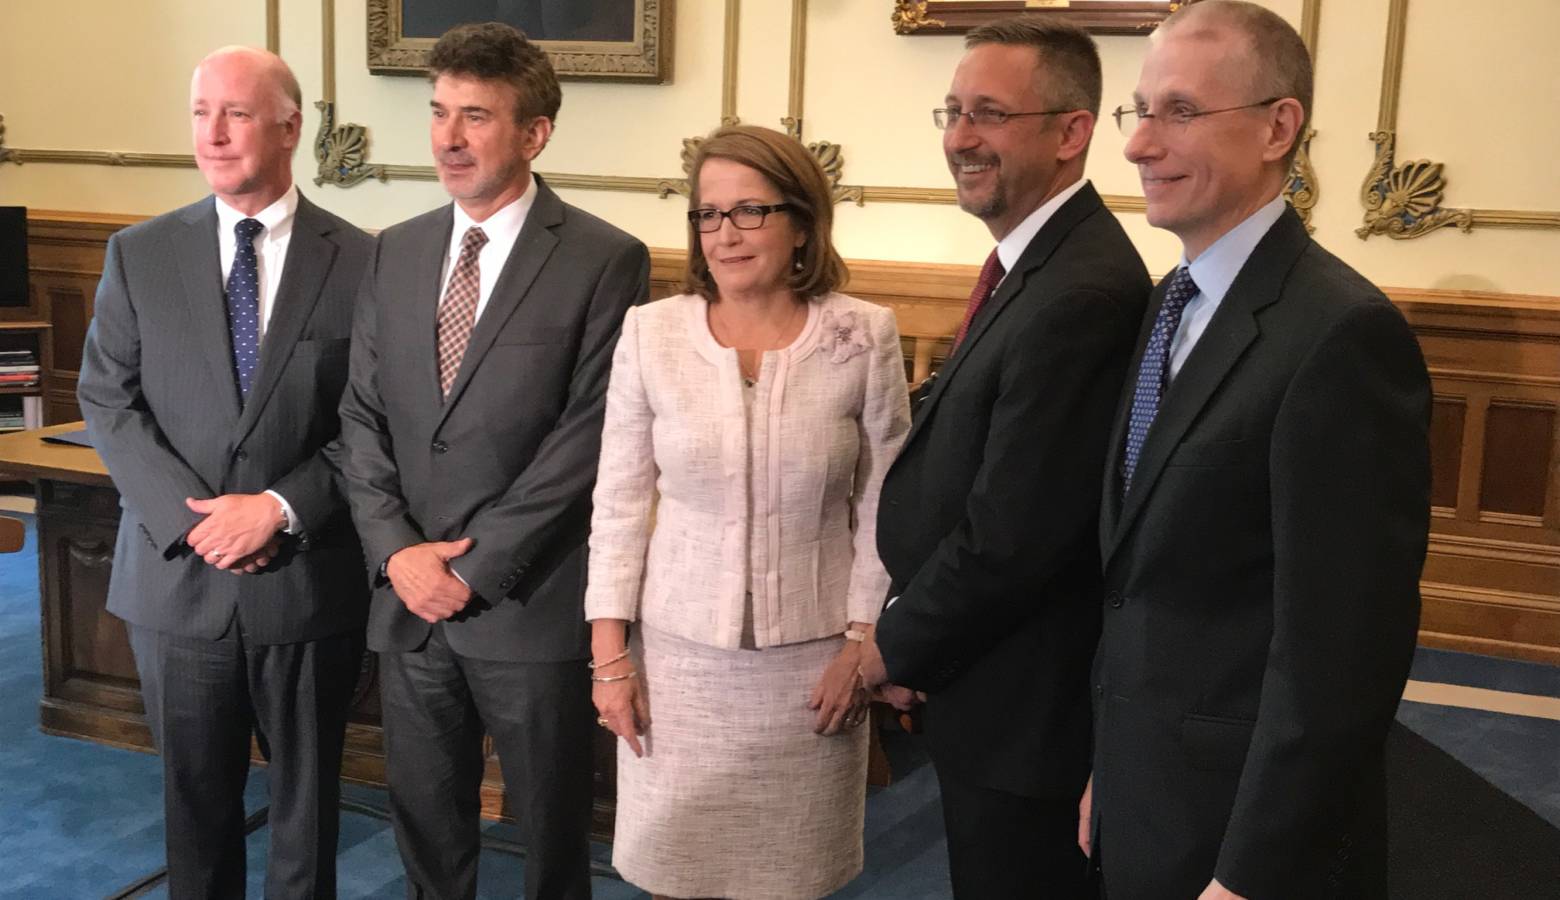 Christopher Goff (second from left) poses with his new Supreme Court colleagues - (from left to right) Justices Mark Massa and Steven David, Chief Justice Loretta Rush, and Justice Geoffrey Slaughter. (Brandon Smith/IPB News)